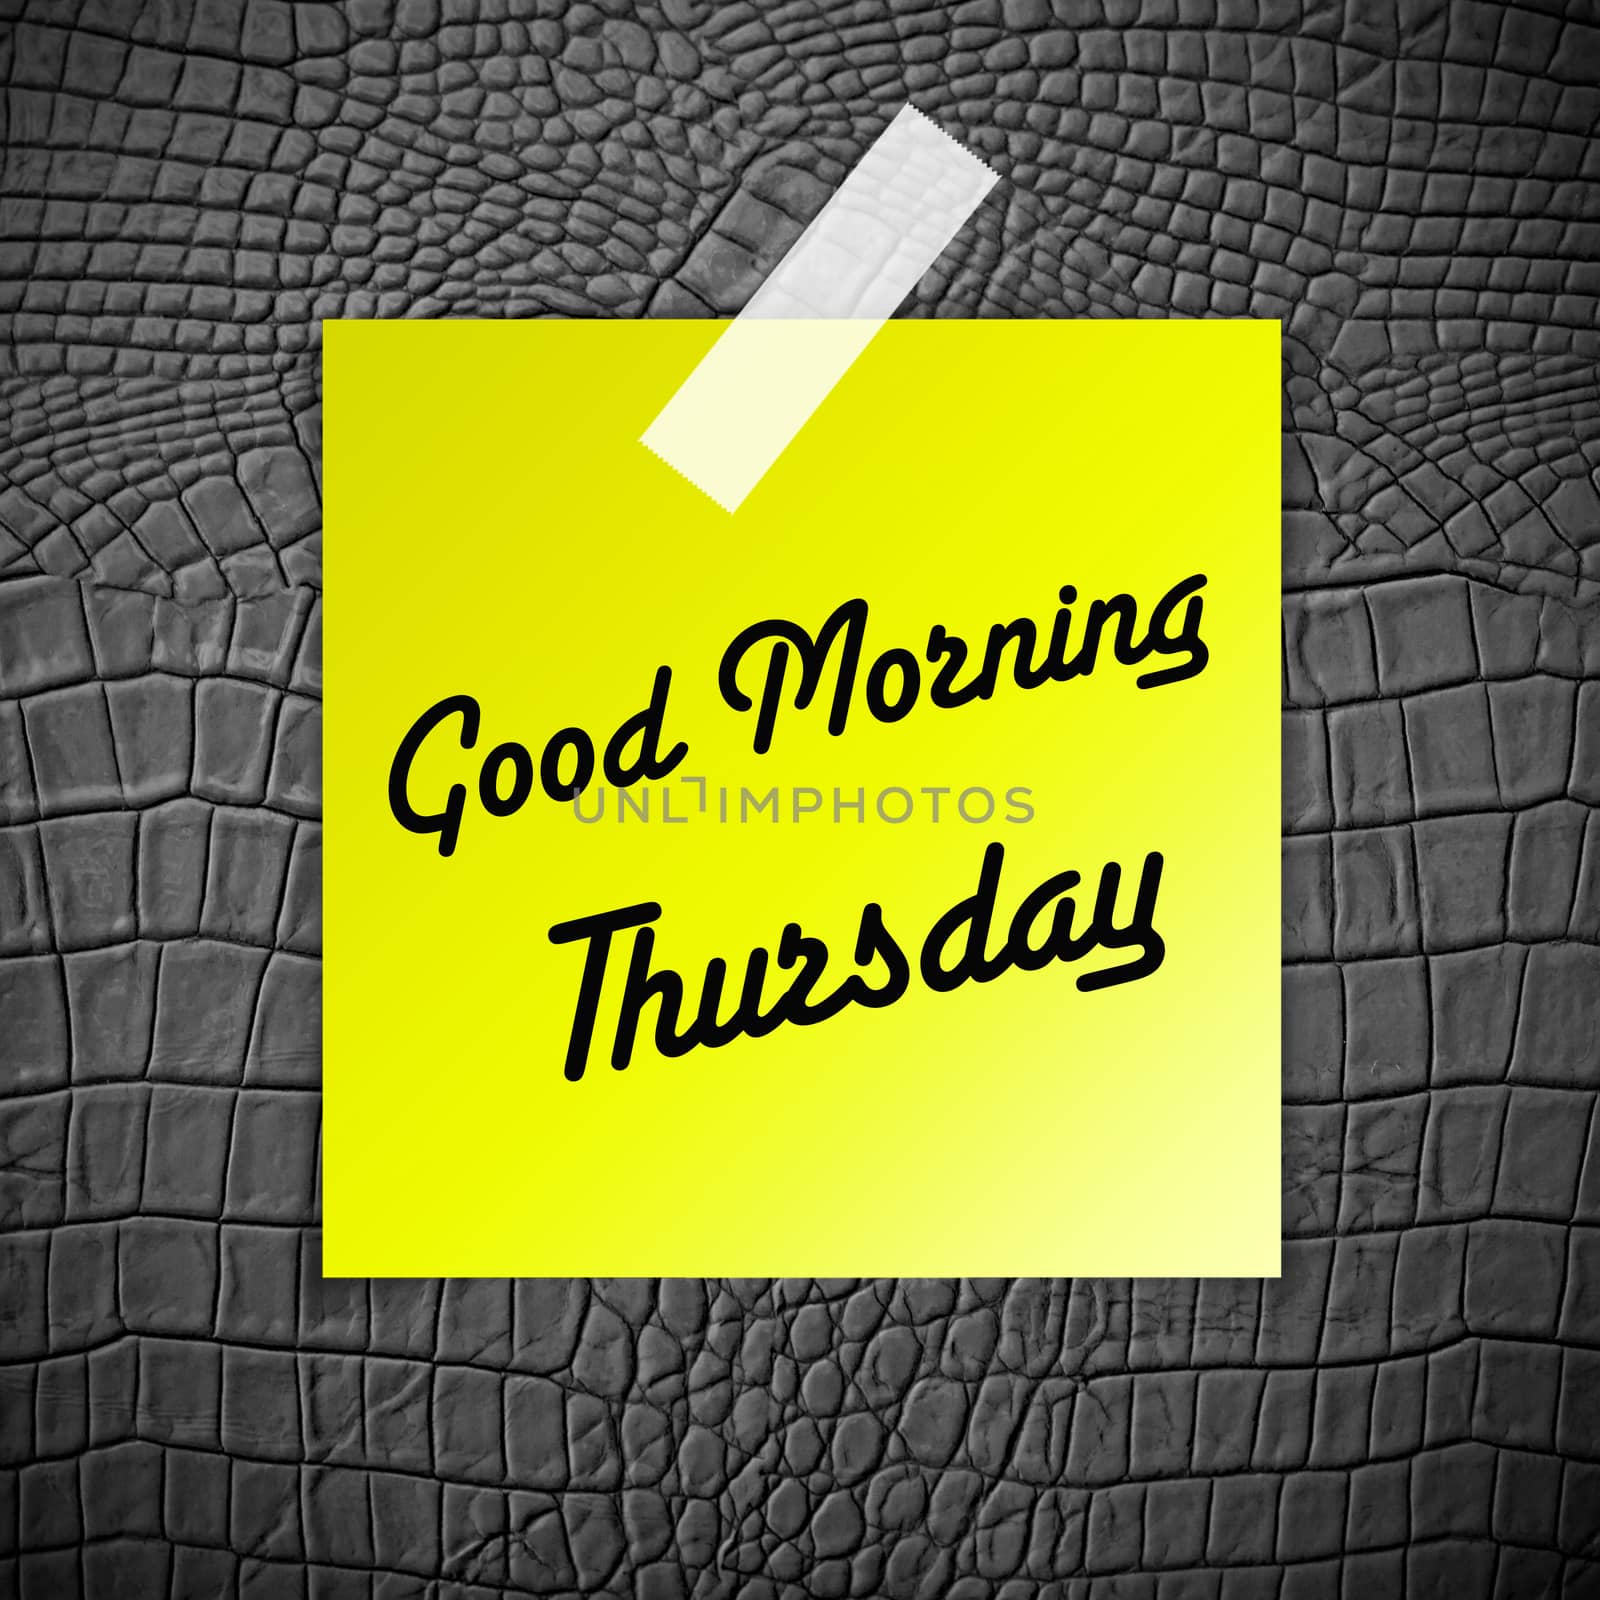 Good morning Thursday working day on Grey Leather texture backgr by 2nix